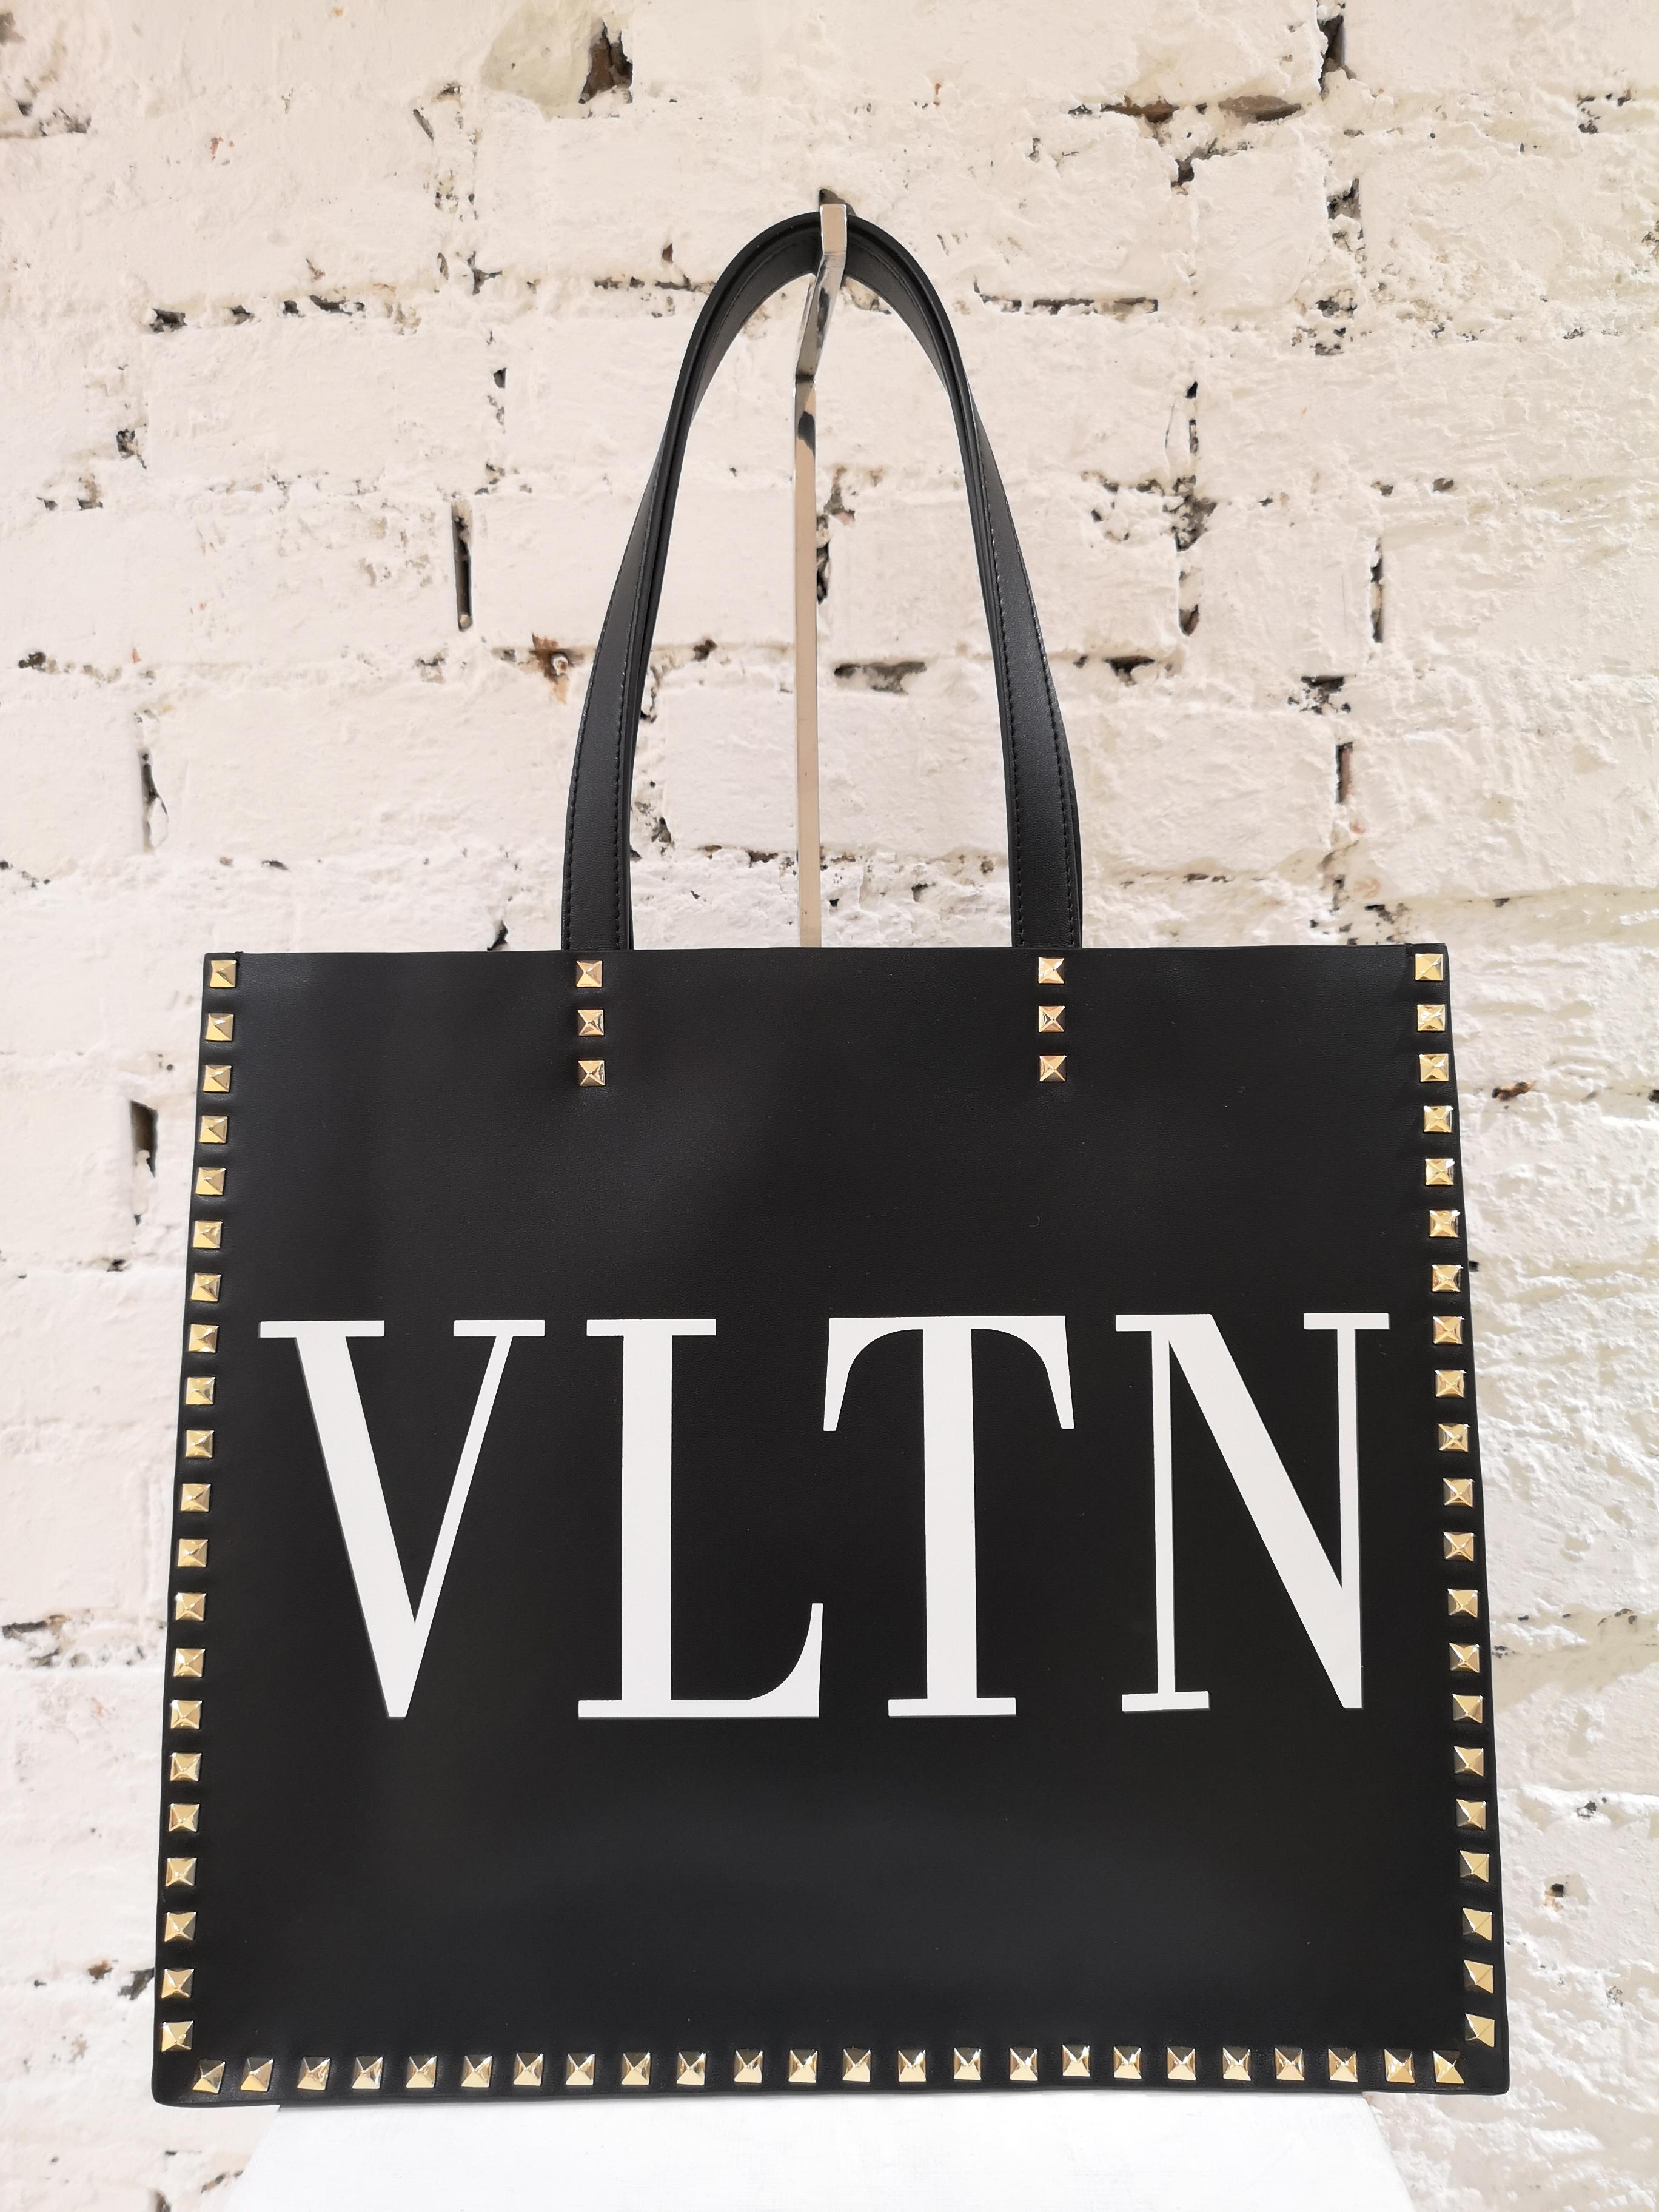 Valentino Garavani's venerable craftsmanship is combined with an updated athleisure spirit to create the VLTN shopping bag. Minimal lines, a sporty logo, and iconic studs make the piece, which reflects the values of refinement and modernity that